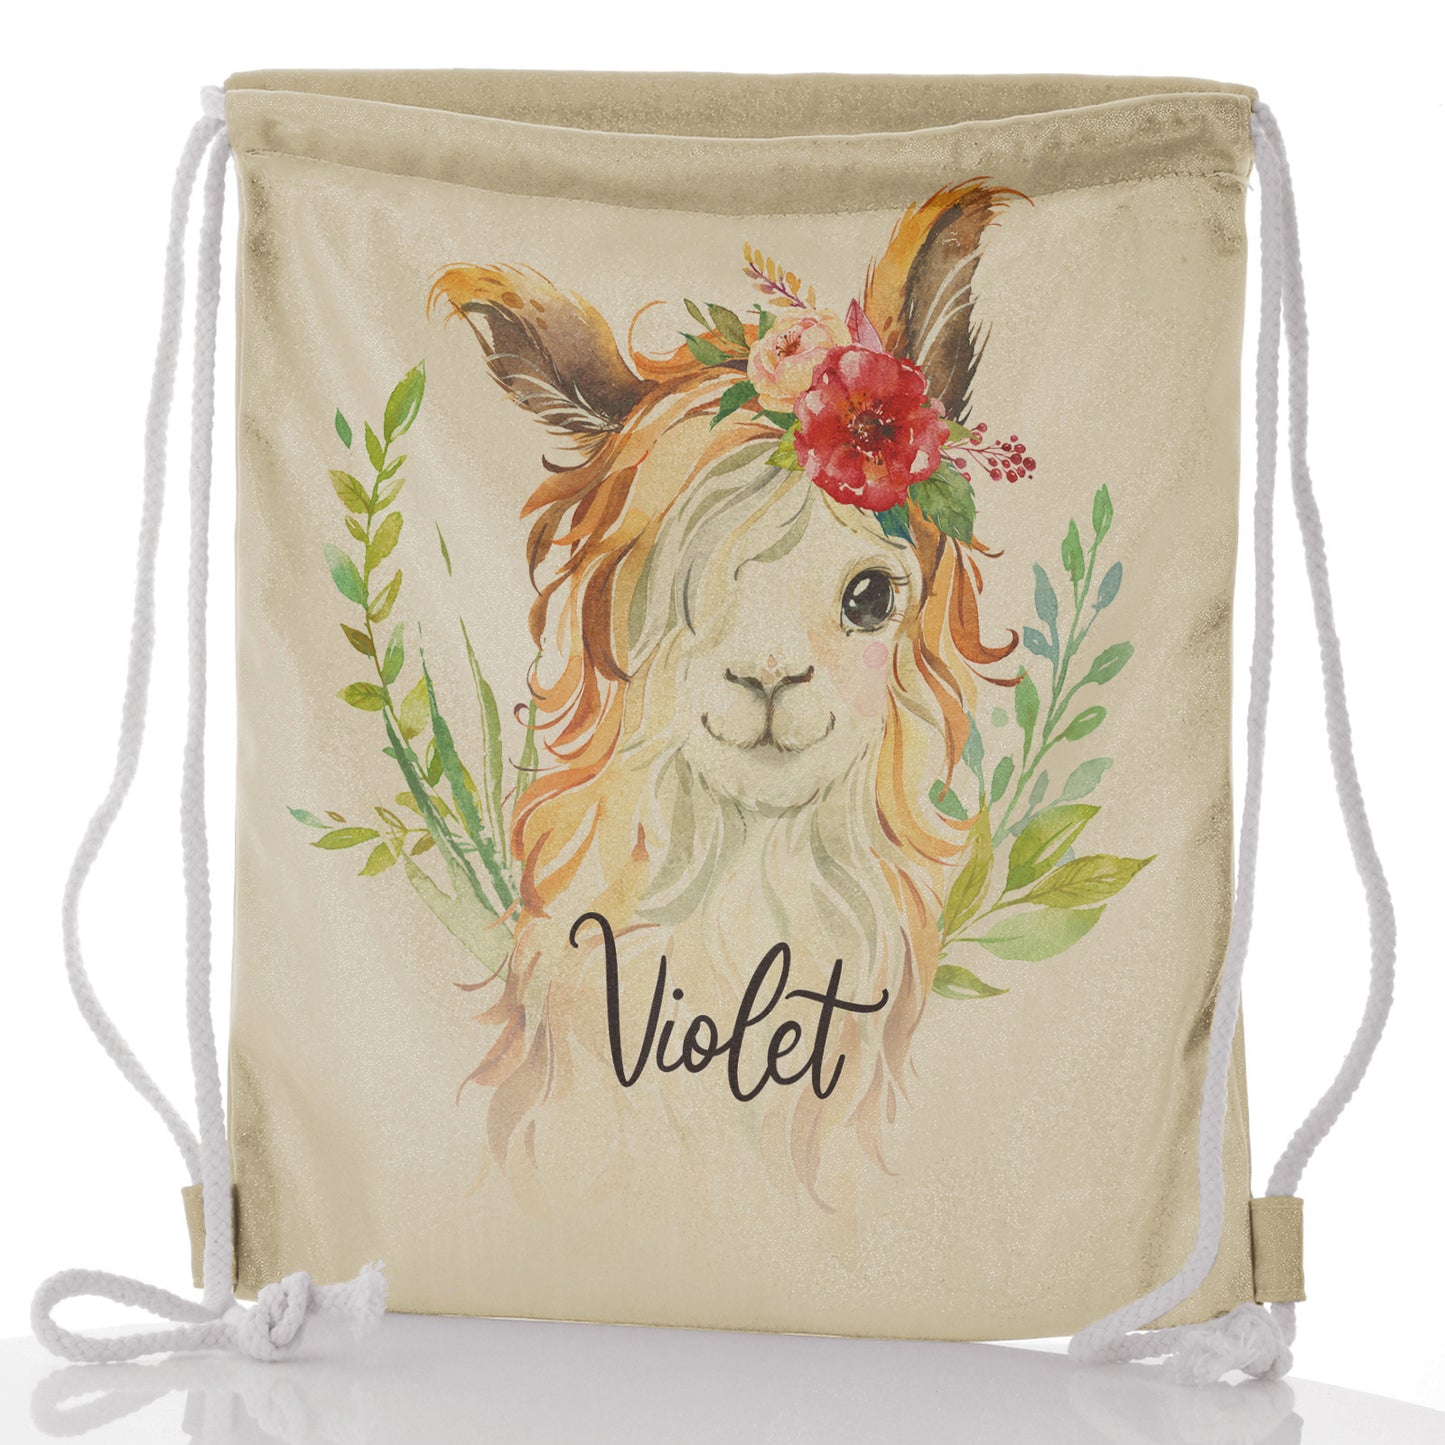 Personalised Glitter Drawstring Backpack with White Goat with Red Flower Hair and Cute Text